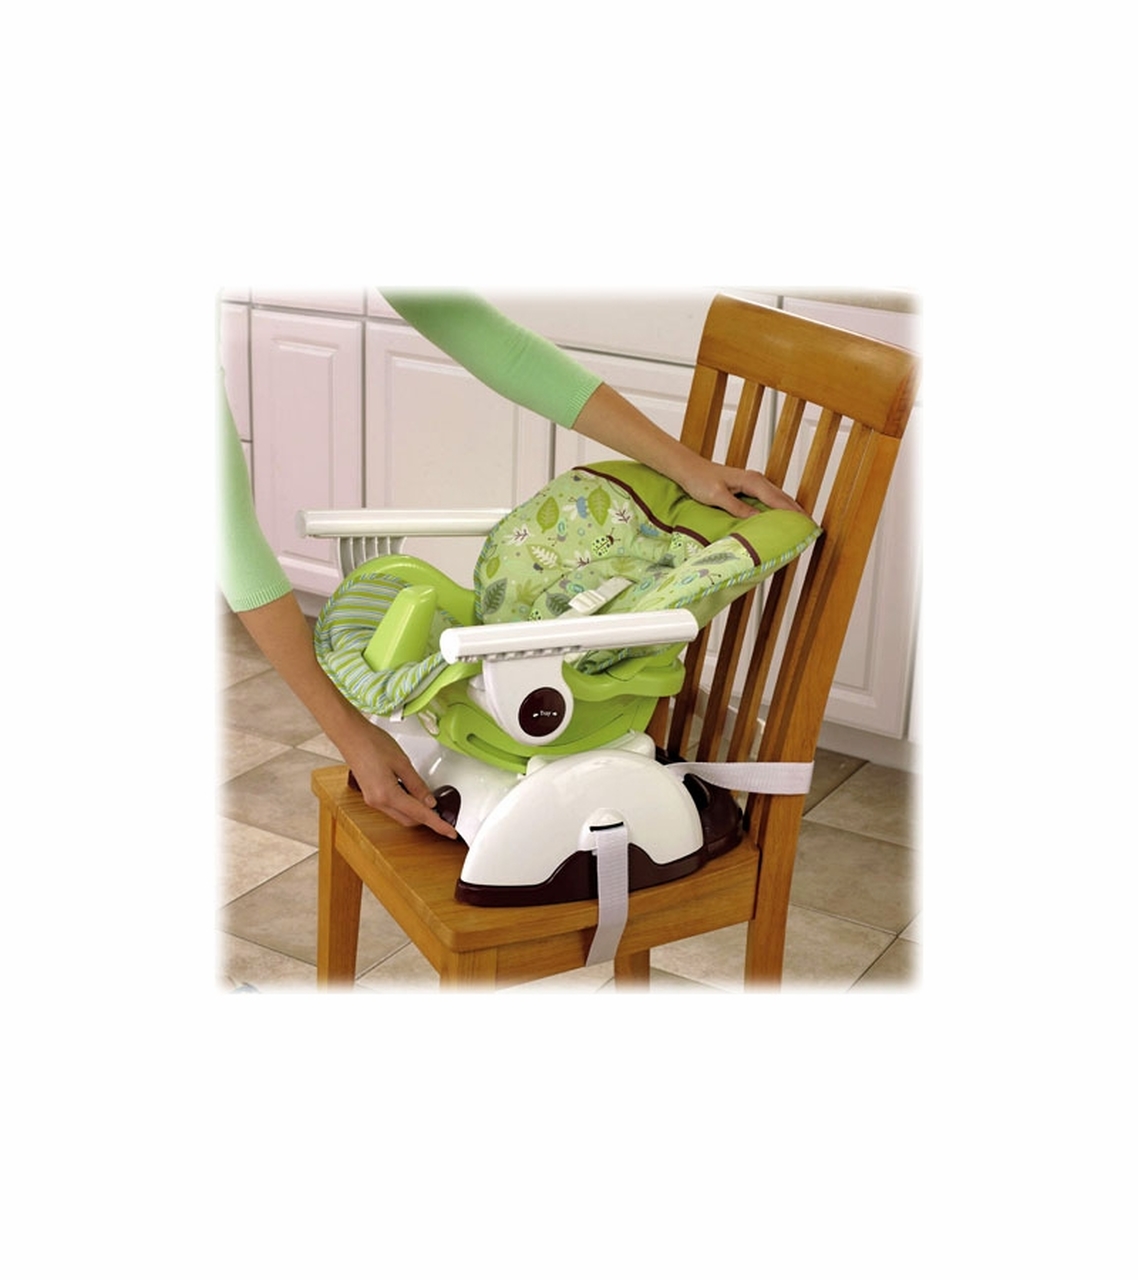 Fisher-Price SpaceSaver High Chair